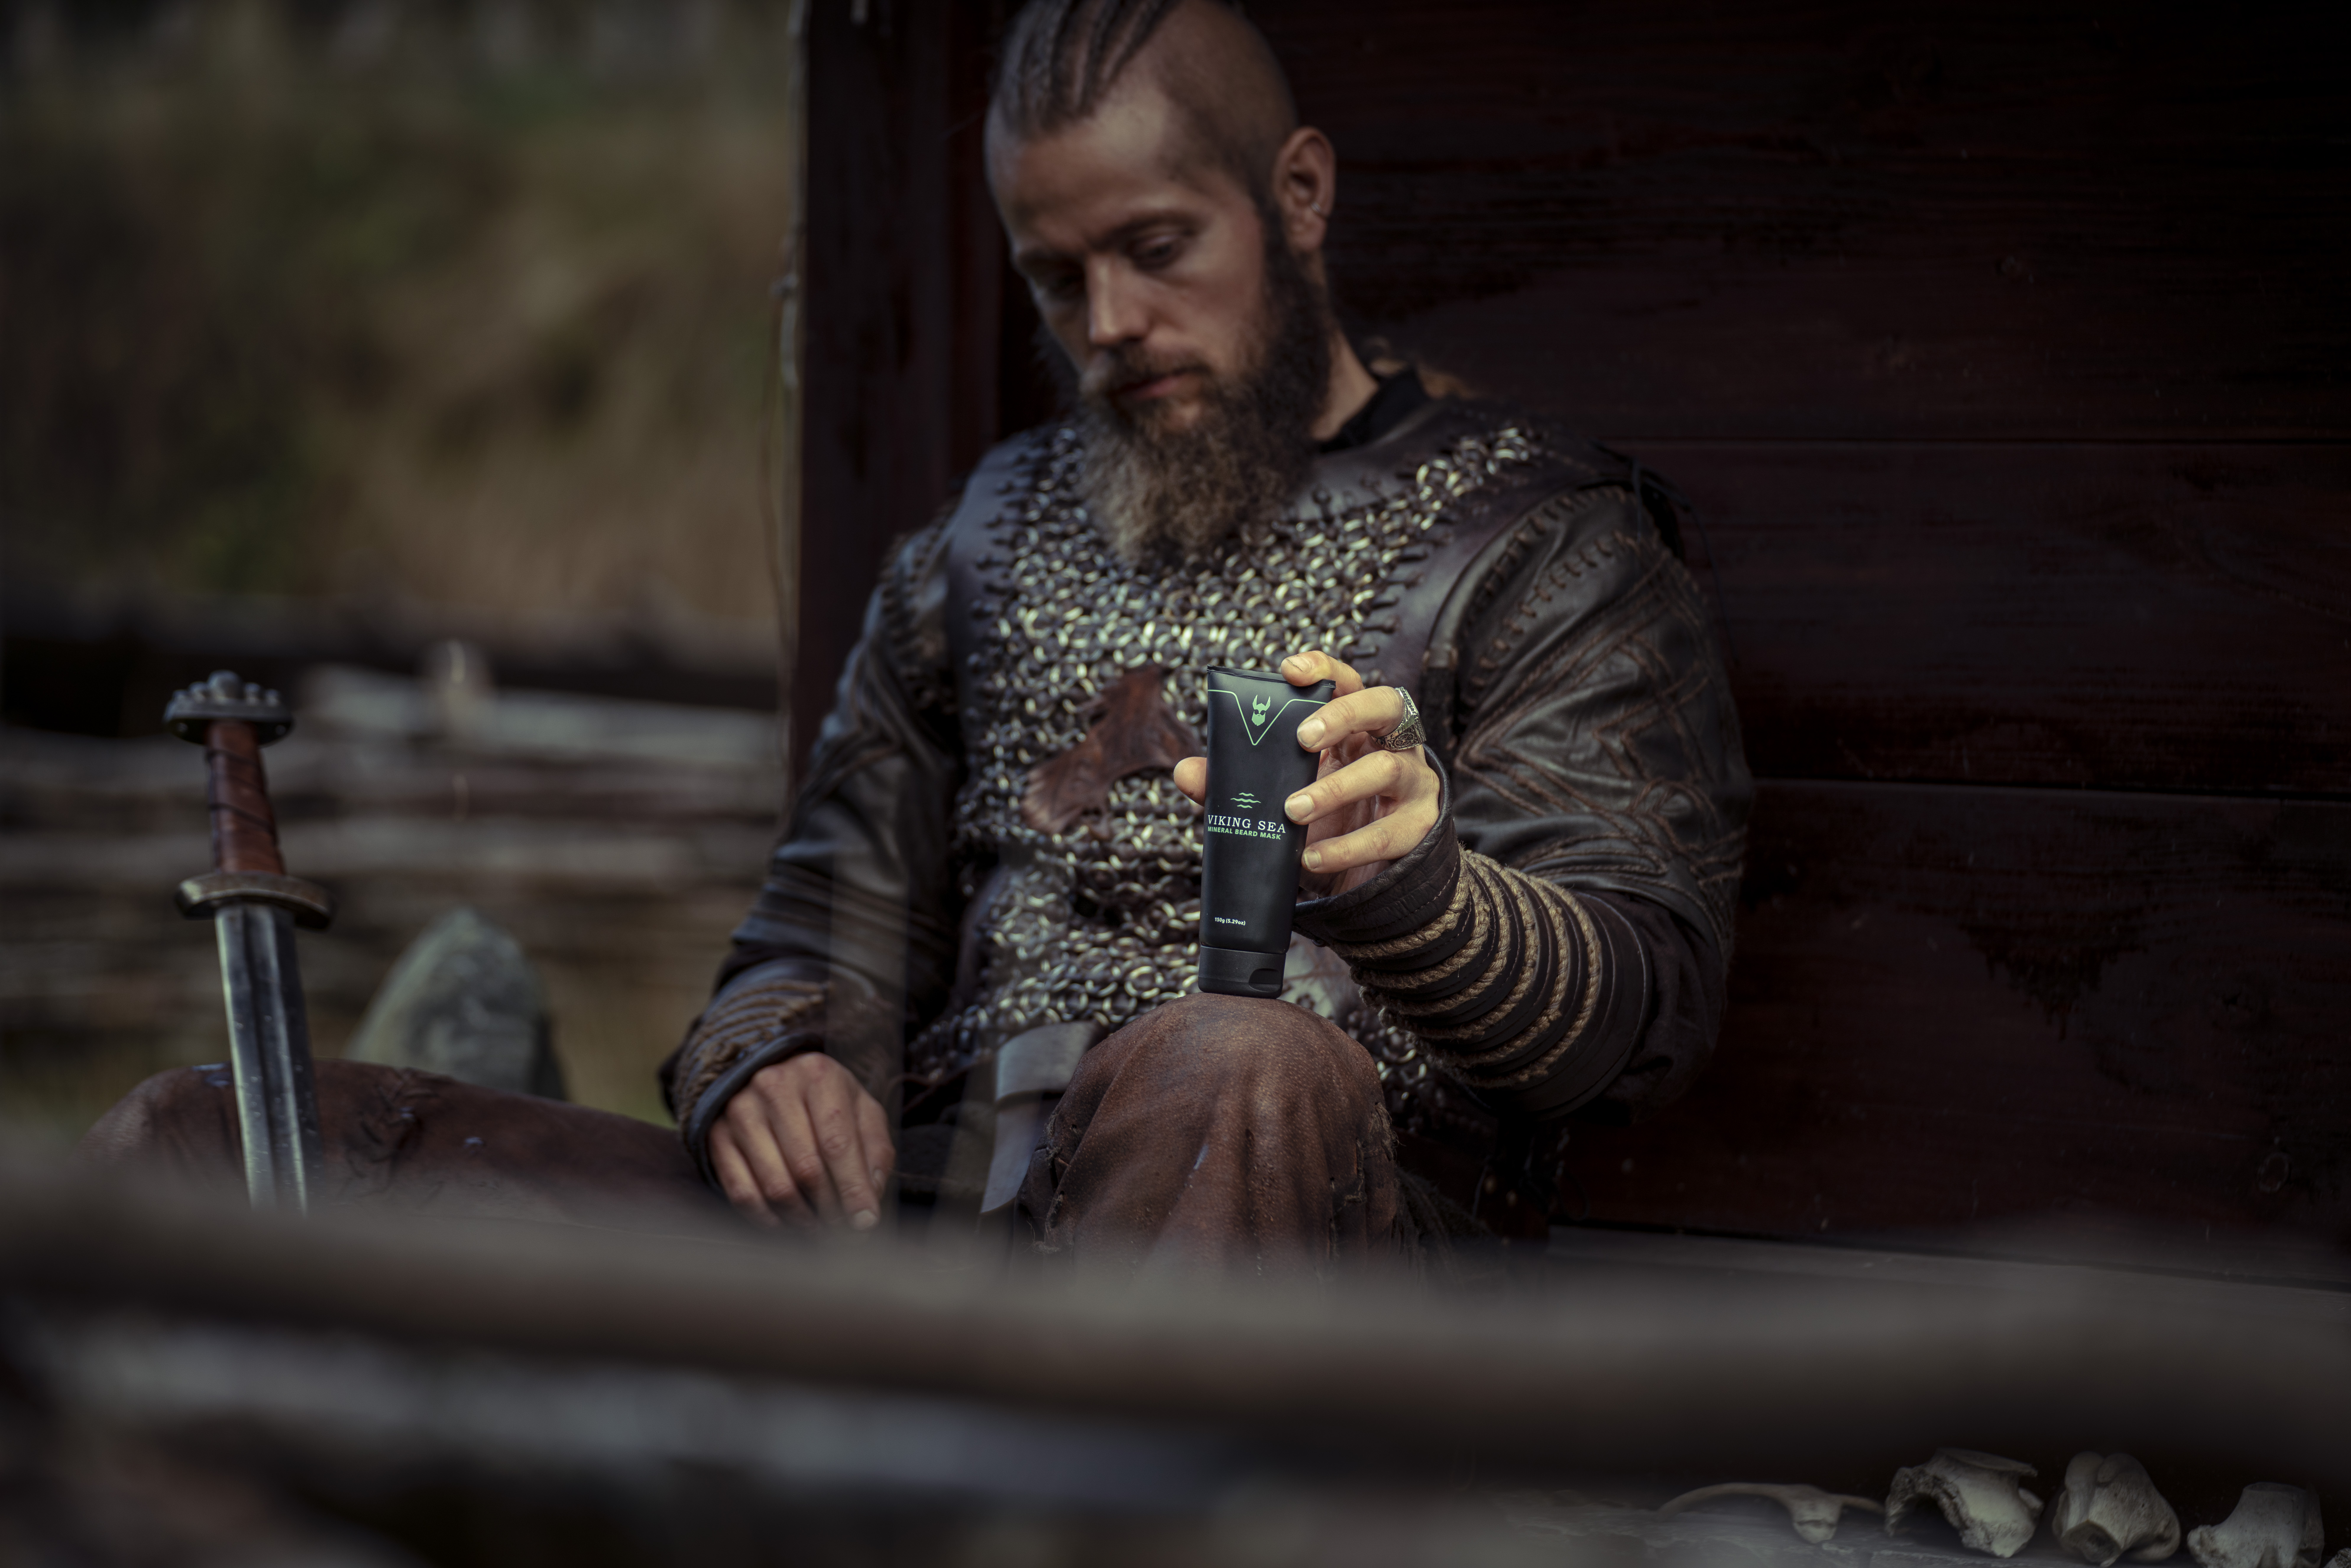 Best Viking Beard Styles: How To Grow & Style Your Own?